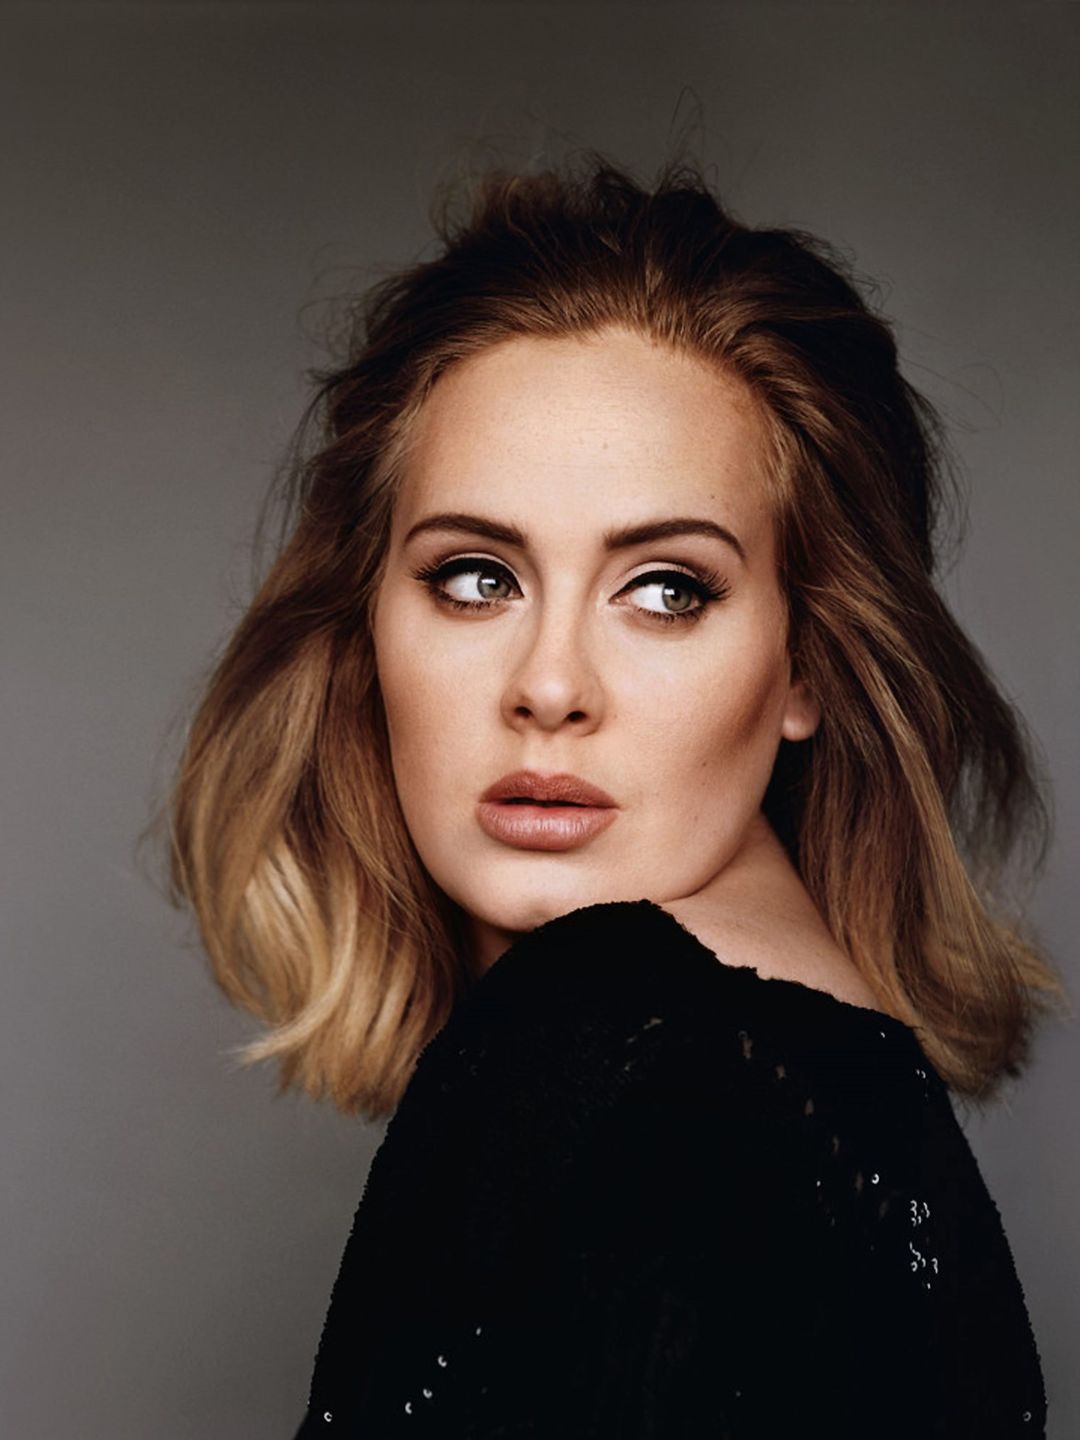 Adele unphotoshopped pictures